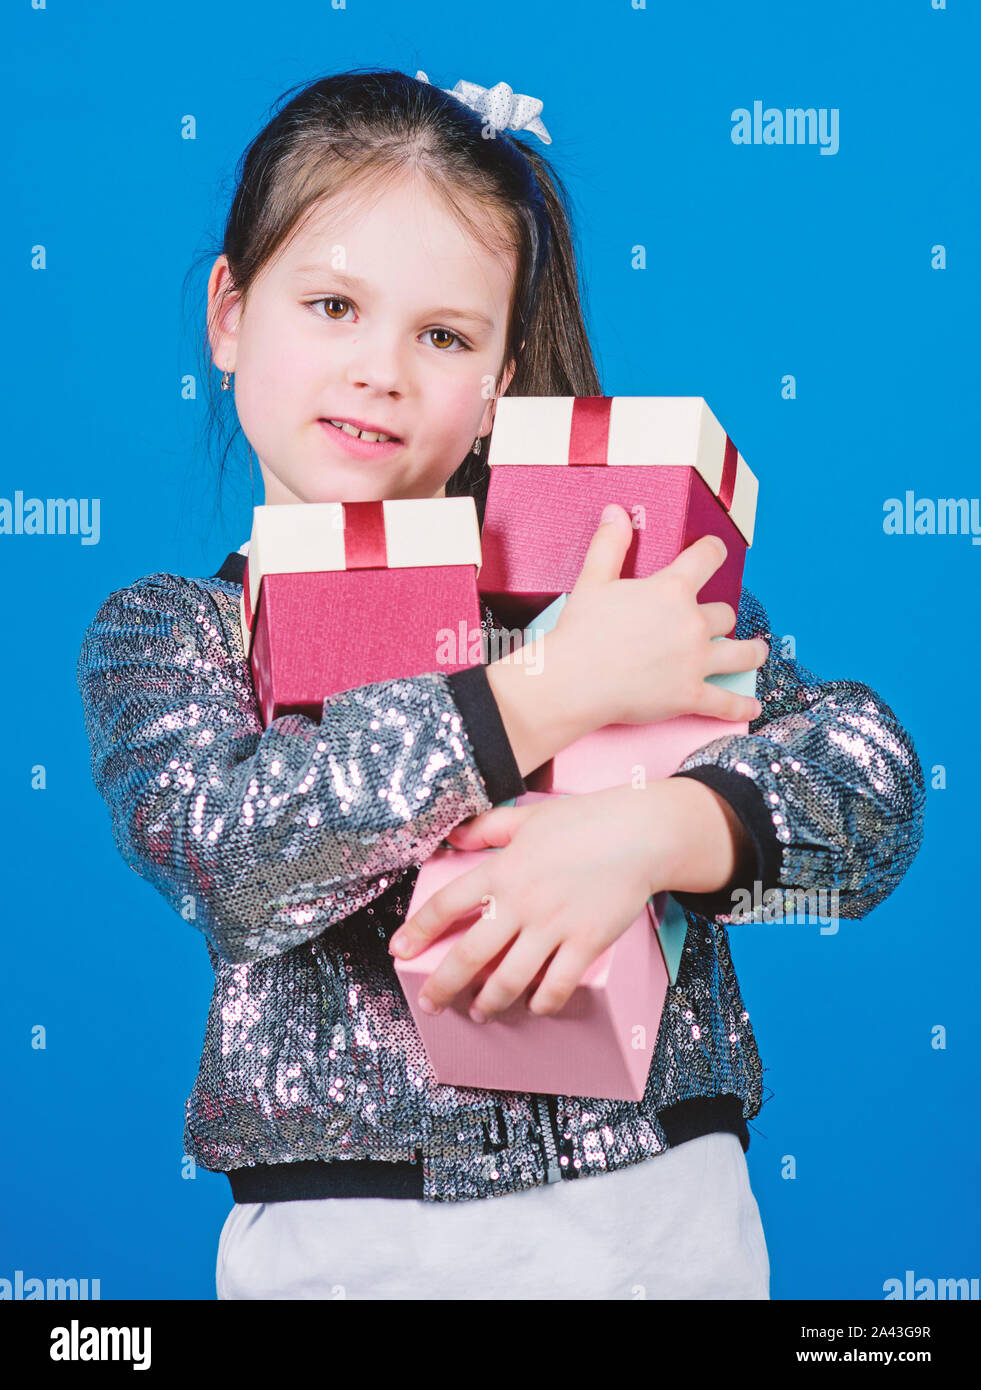 Black friday. Shopping day. Child carry lot gift boxes. Kids fashion. Surprise gift box. Birthday wish list. Special happens every day. Shop for what you want. Girl with gift boxes blue background. Stock Photo